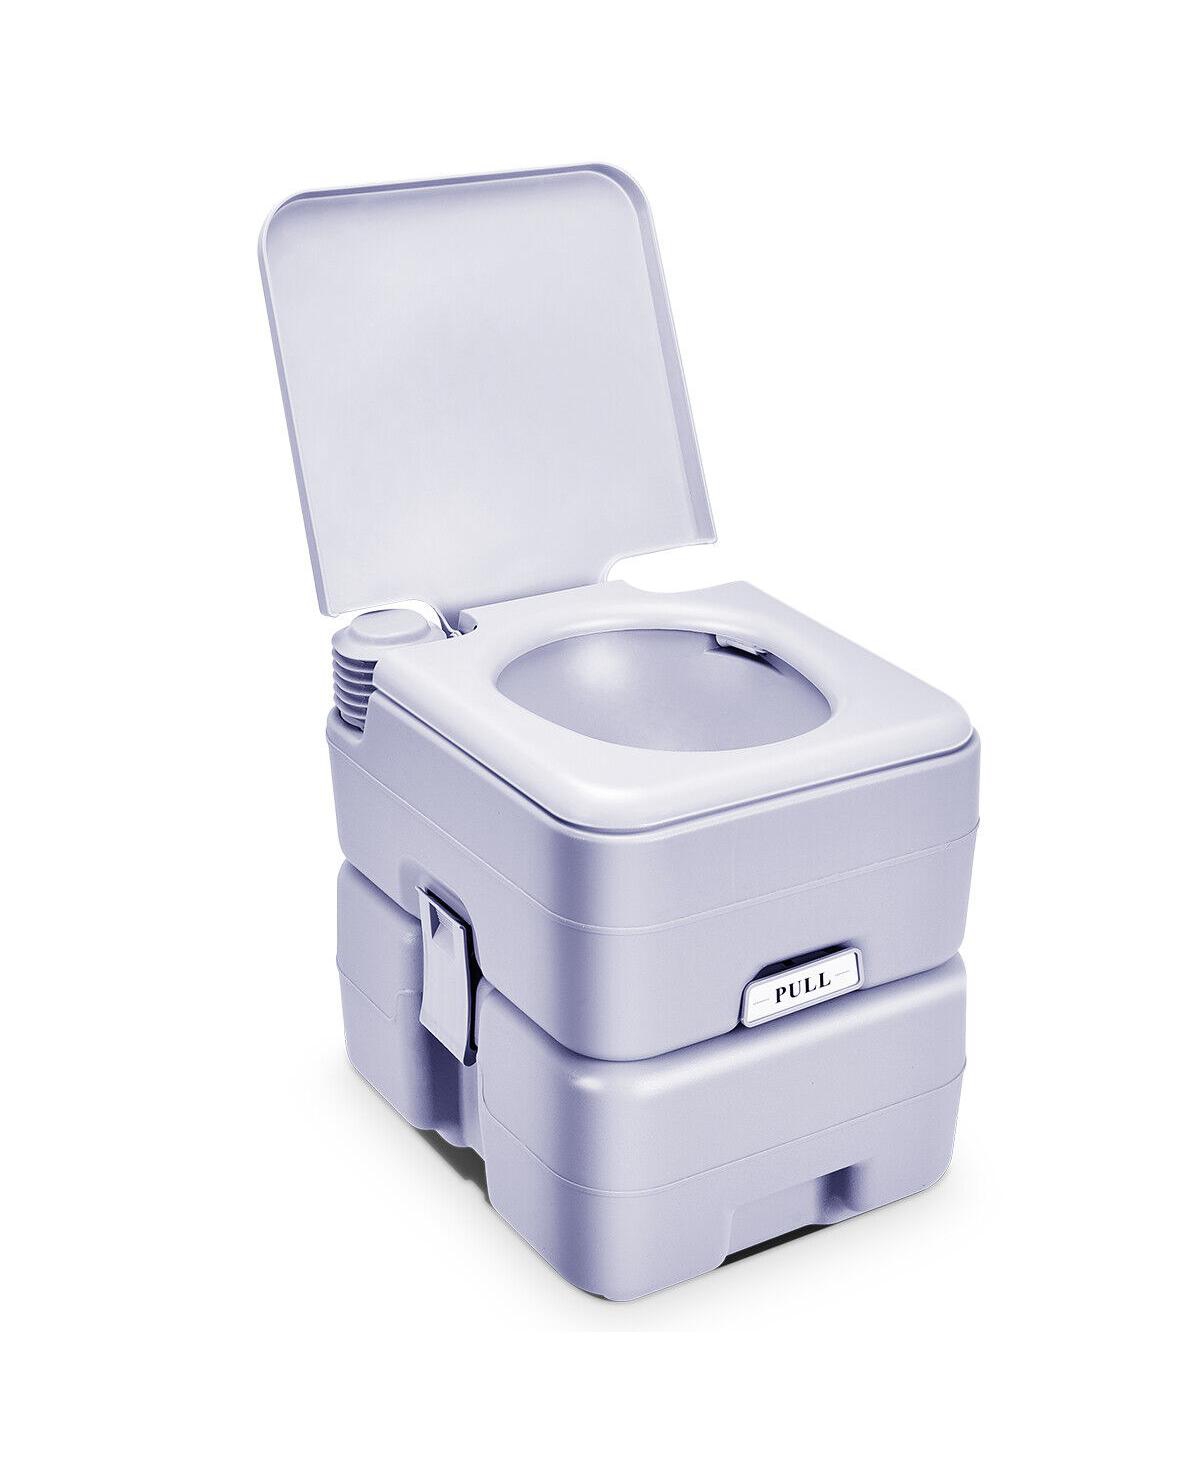 5.3 Gallon Portable Toilet with Waste Tank and Built-in Rotating Spout-Grey - Grey